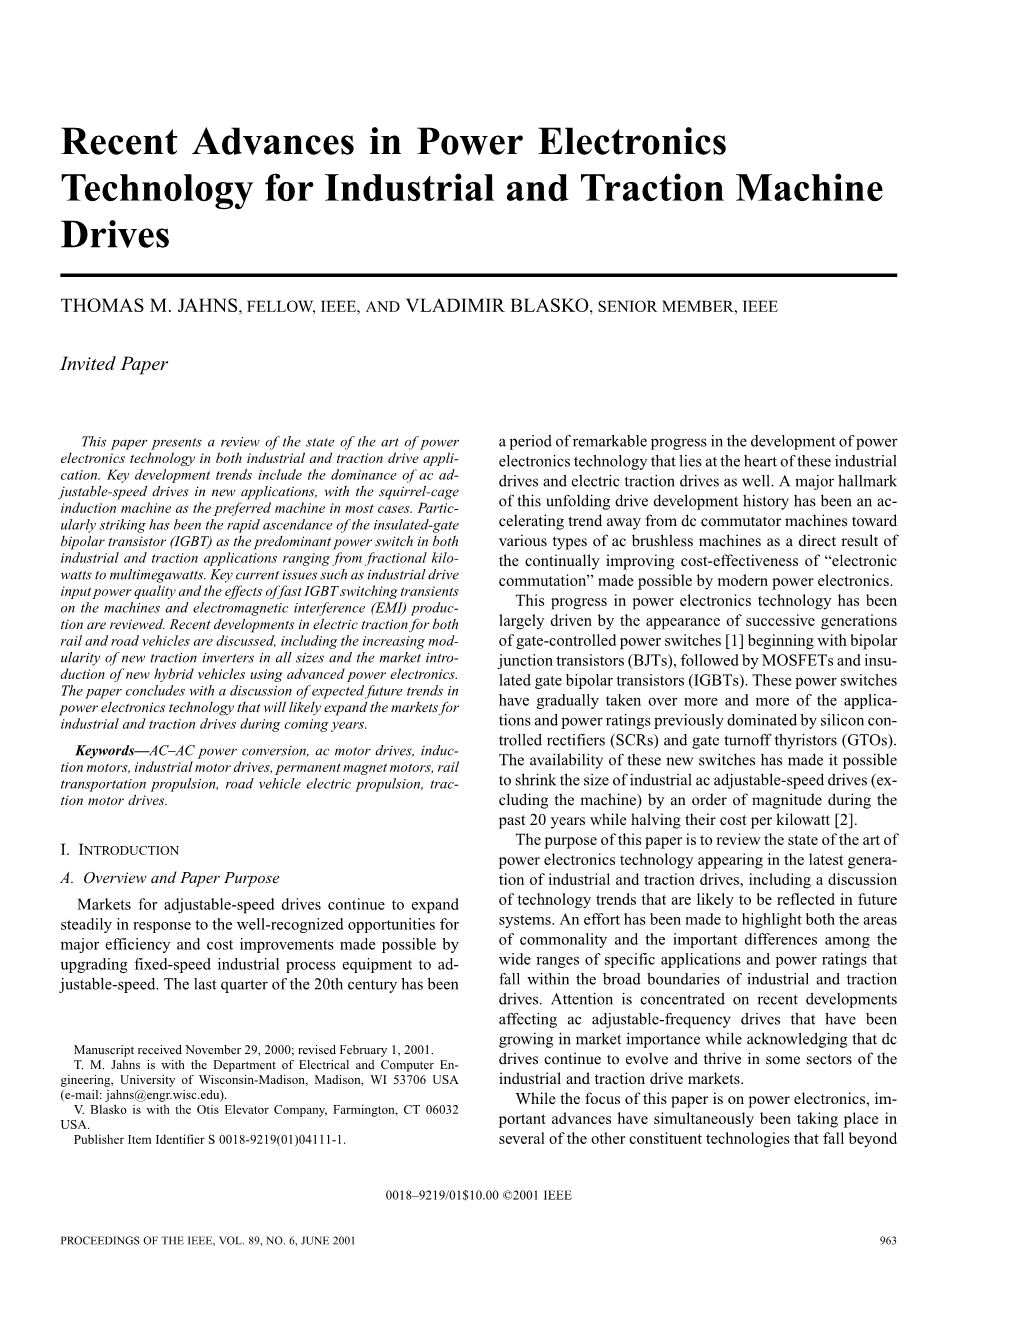 Recent Advances in Power Electronics Technology for Industrial and Traction Machine Drives